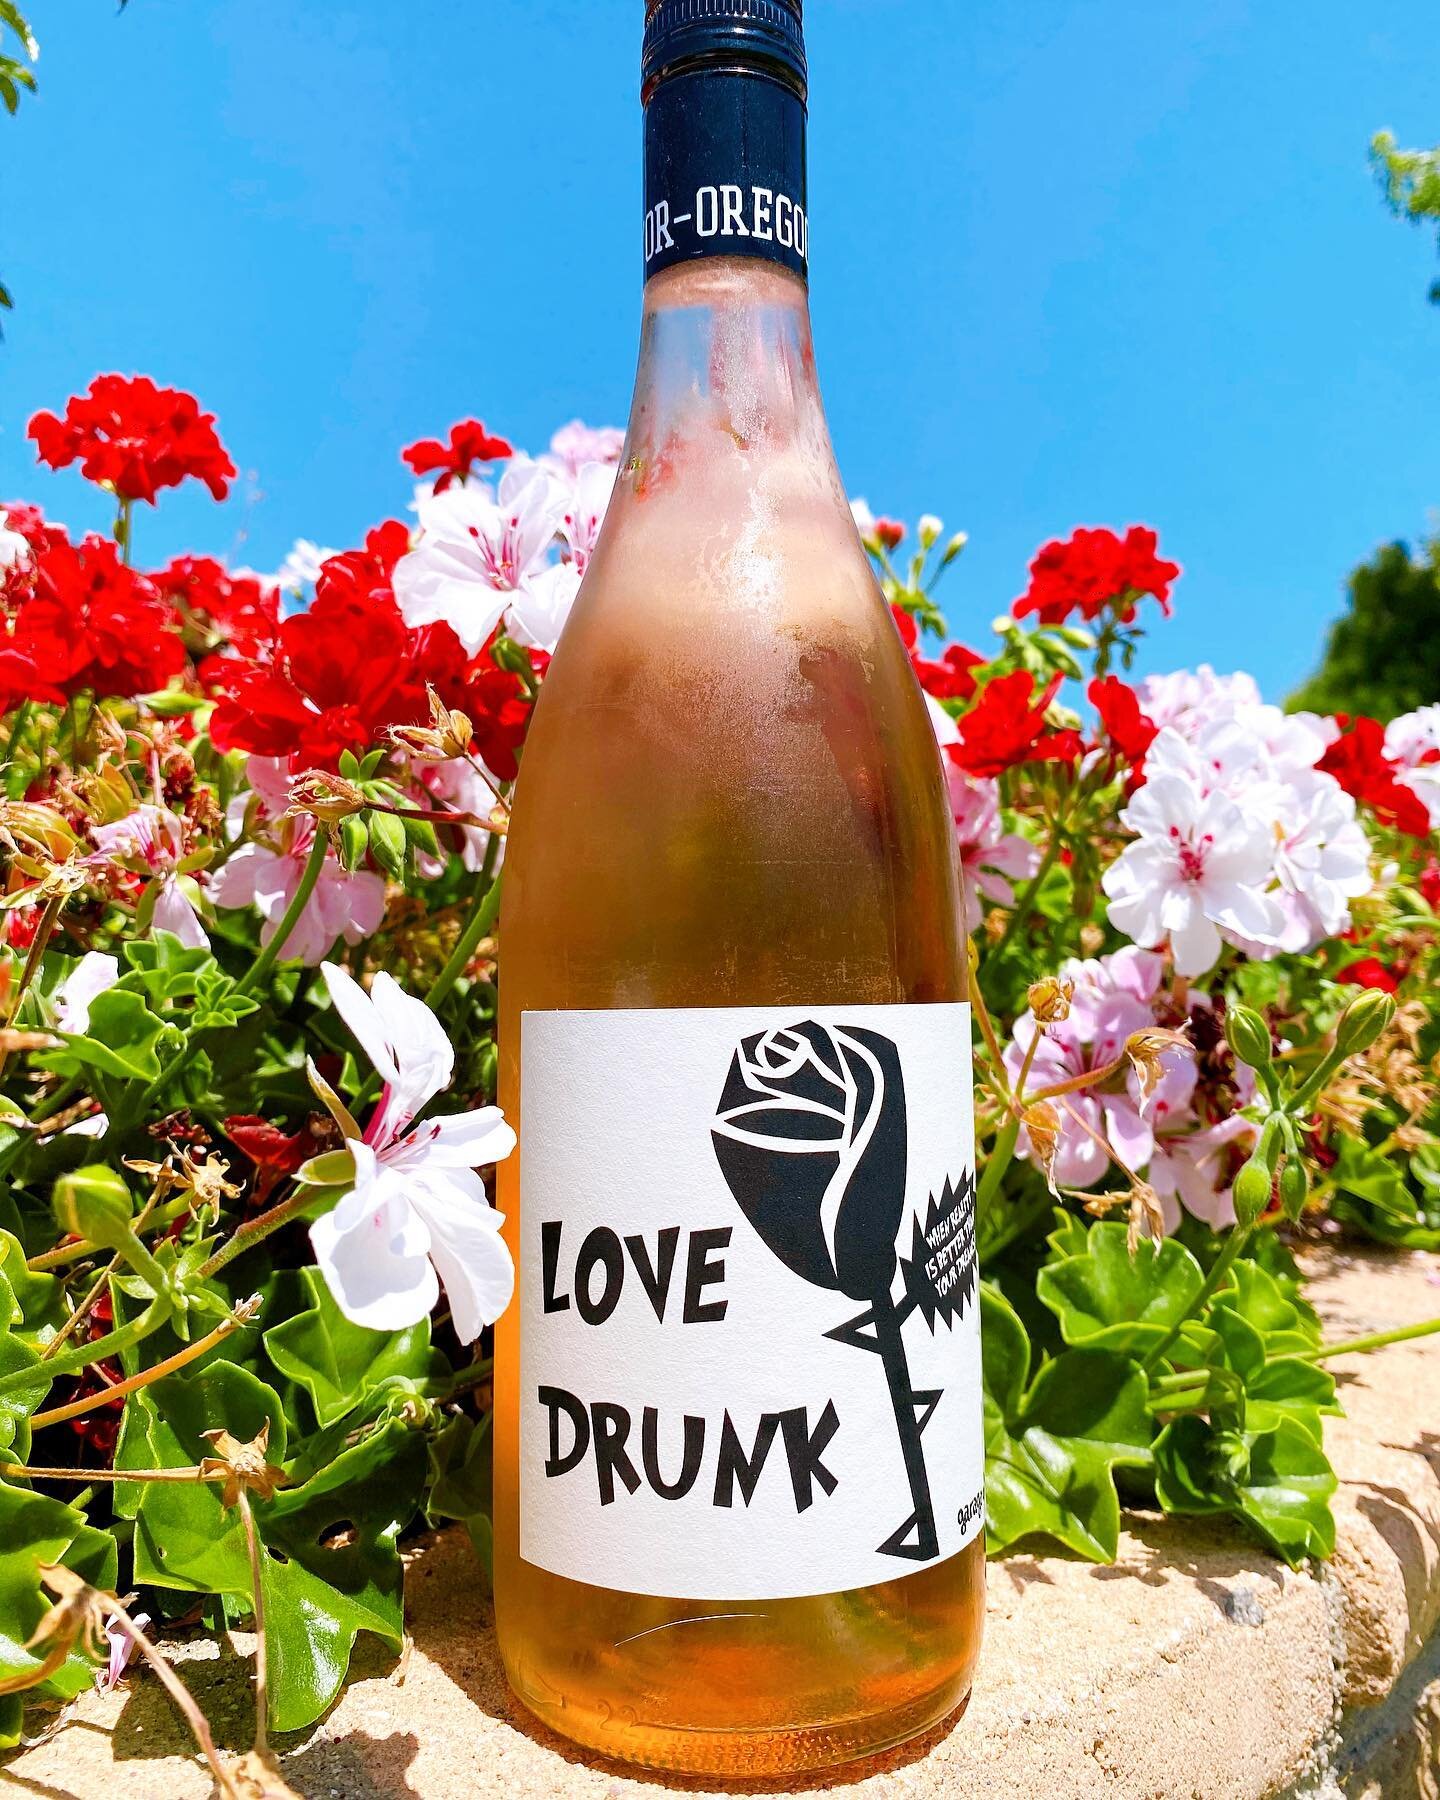 &ldquo;Love Drunk&rdquo; from @maisonnoirwines  is one of my go-to fave ros&eacute;s for a long time 💕 So refreshing with flavors of 🍓 and a hint of 🥝 with raspberry on the nose. It is perfection in a bottle, the cool down you need on a hot day, a